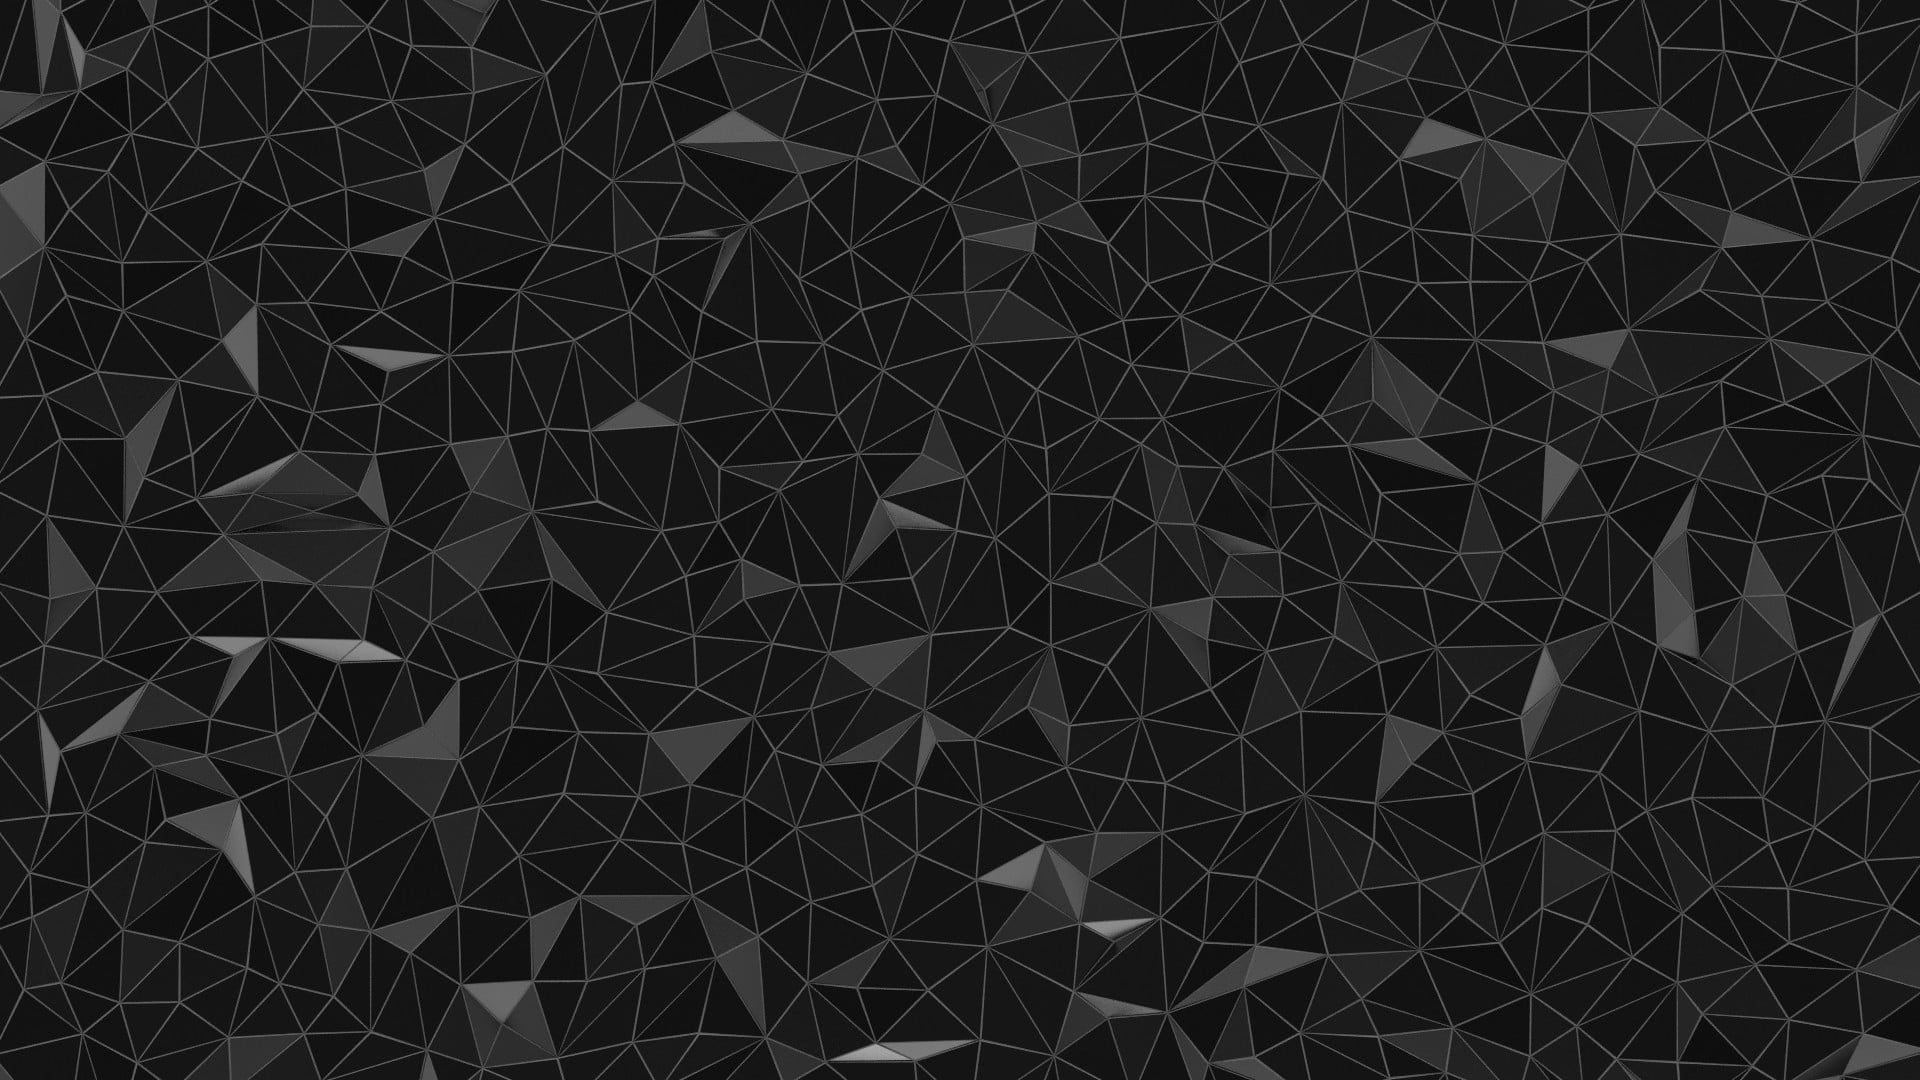 black and gray abstract digital wallpaper digital art low poly #geometry #minimalism #triangle #lines black bac. Digital wallpaper, Digital art, Black background